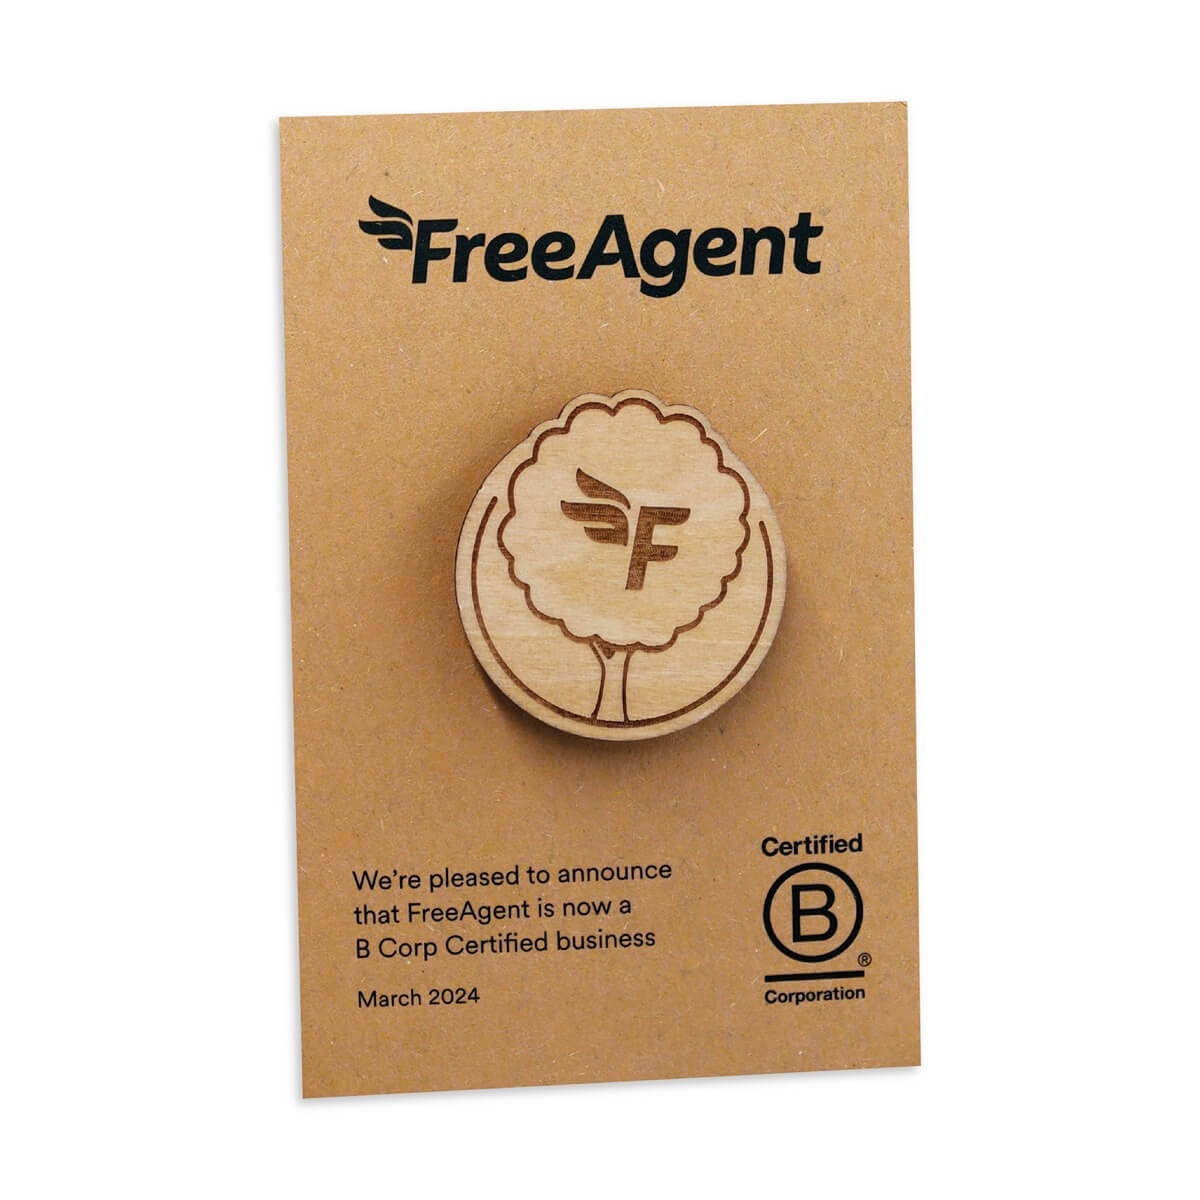 A wooden pin badge on a backing card for FreeAgent